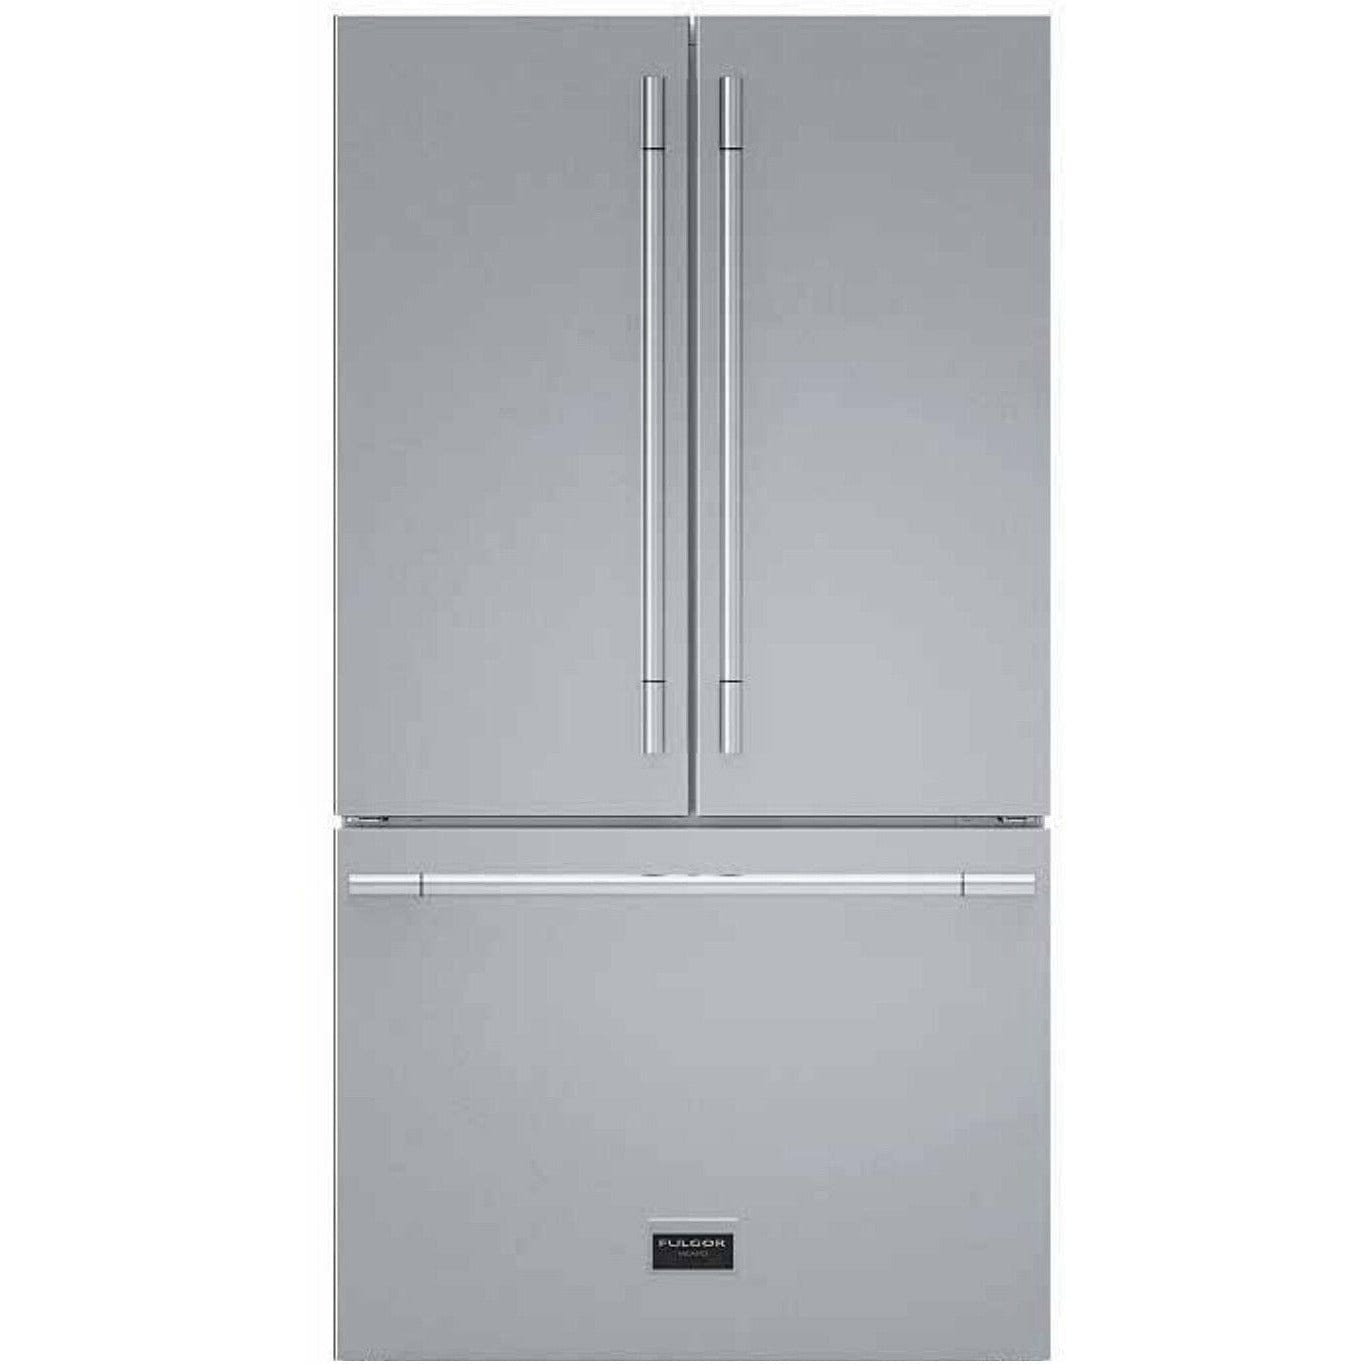 Fulgor Milano Package - 30" Dual Fuel Range,  36" French Door Refrigerator, 24" Built-In Dishwasher and 30" Wall Mount Hood Ranges F6PDF304S1F6FBM36S2 Luxury Appliances Direct